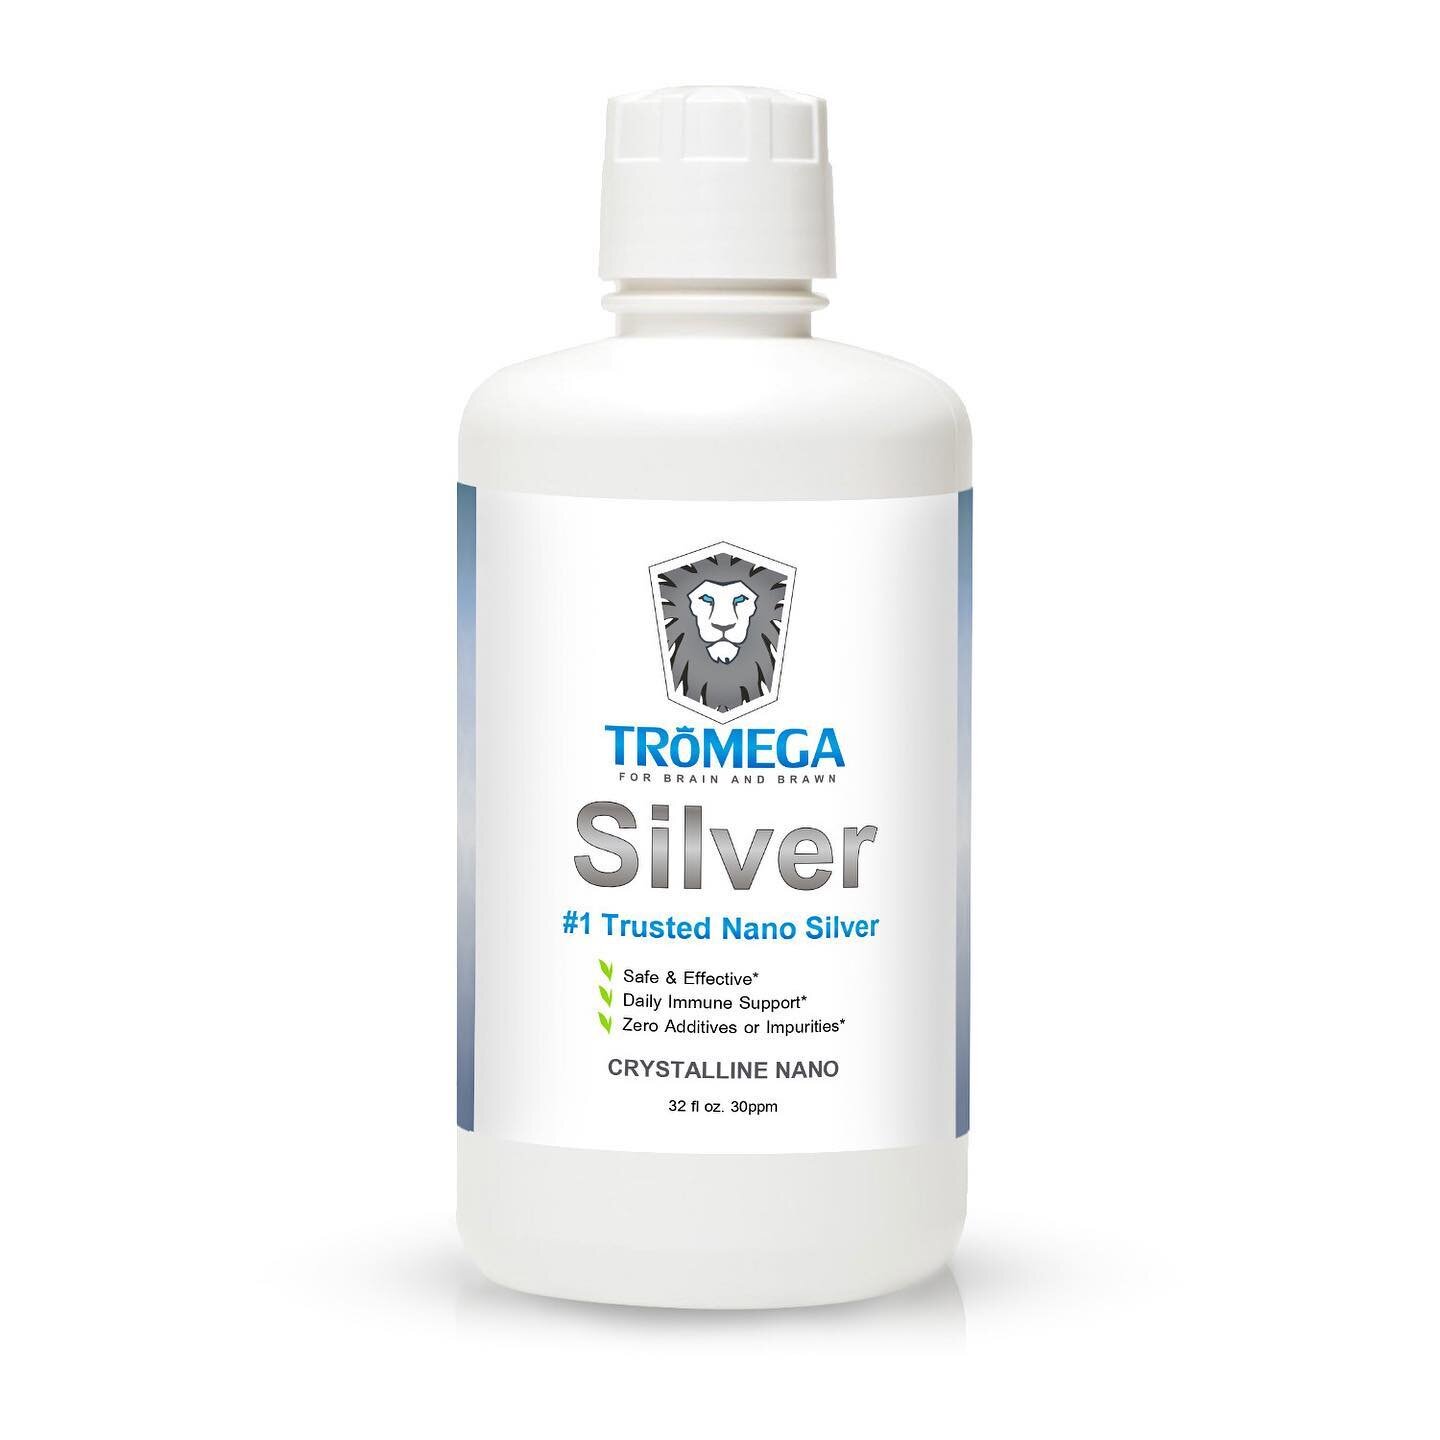 Have you heard all of the benefits of silver?? Here just a few...
🌱Natural antibiotic
🌱Boosts immune system 
🌱Promotes energy levels 
🌱Helps prevent infections 
🌱Promotes healthy sunburn relief

Who wouldn&rsquo;t want these amazing benefits?? H